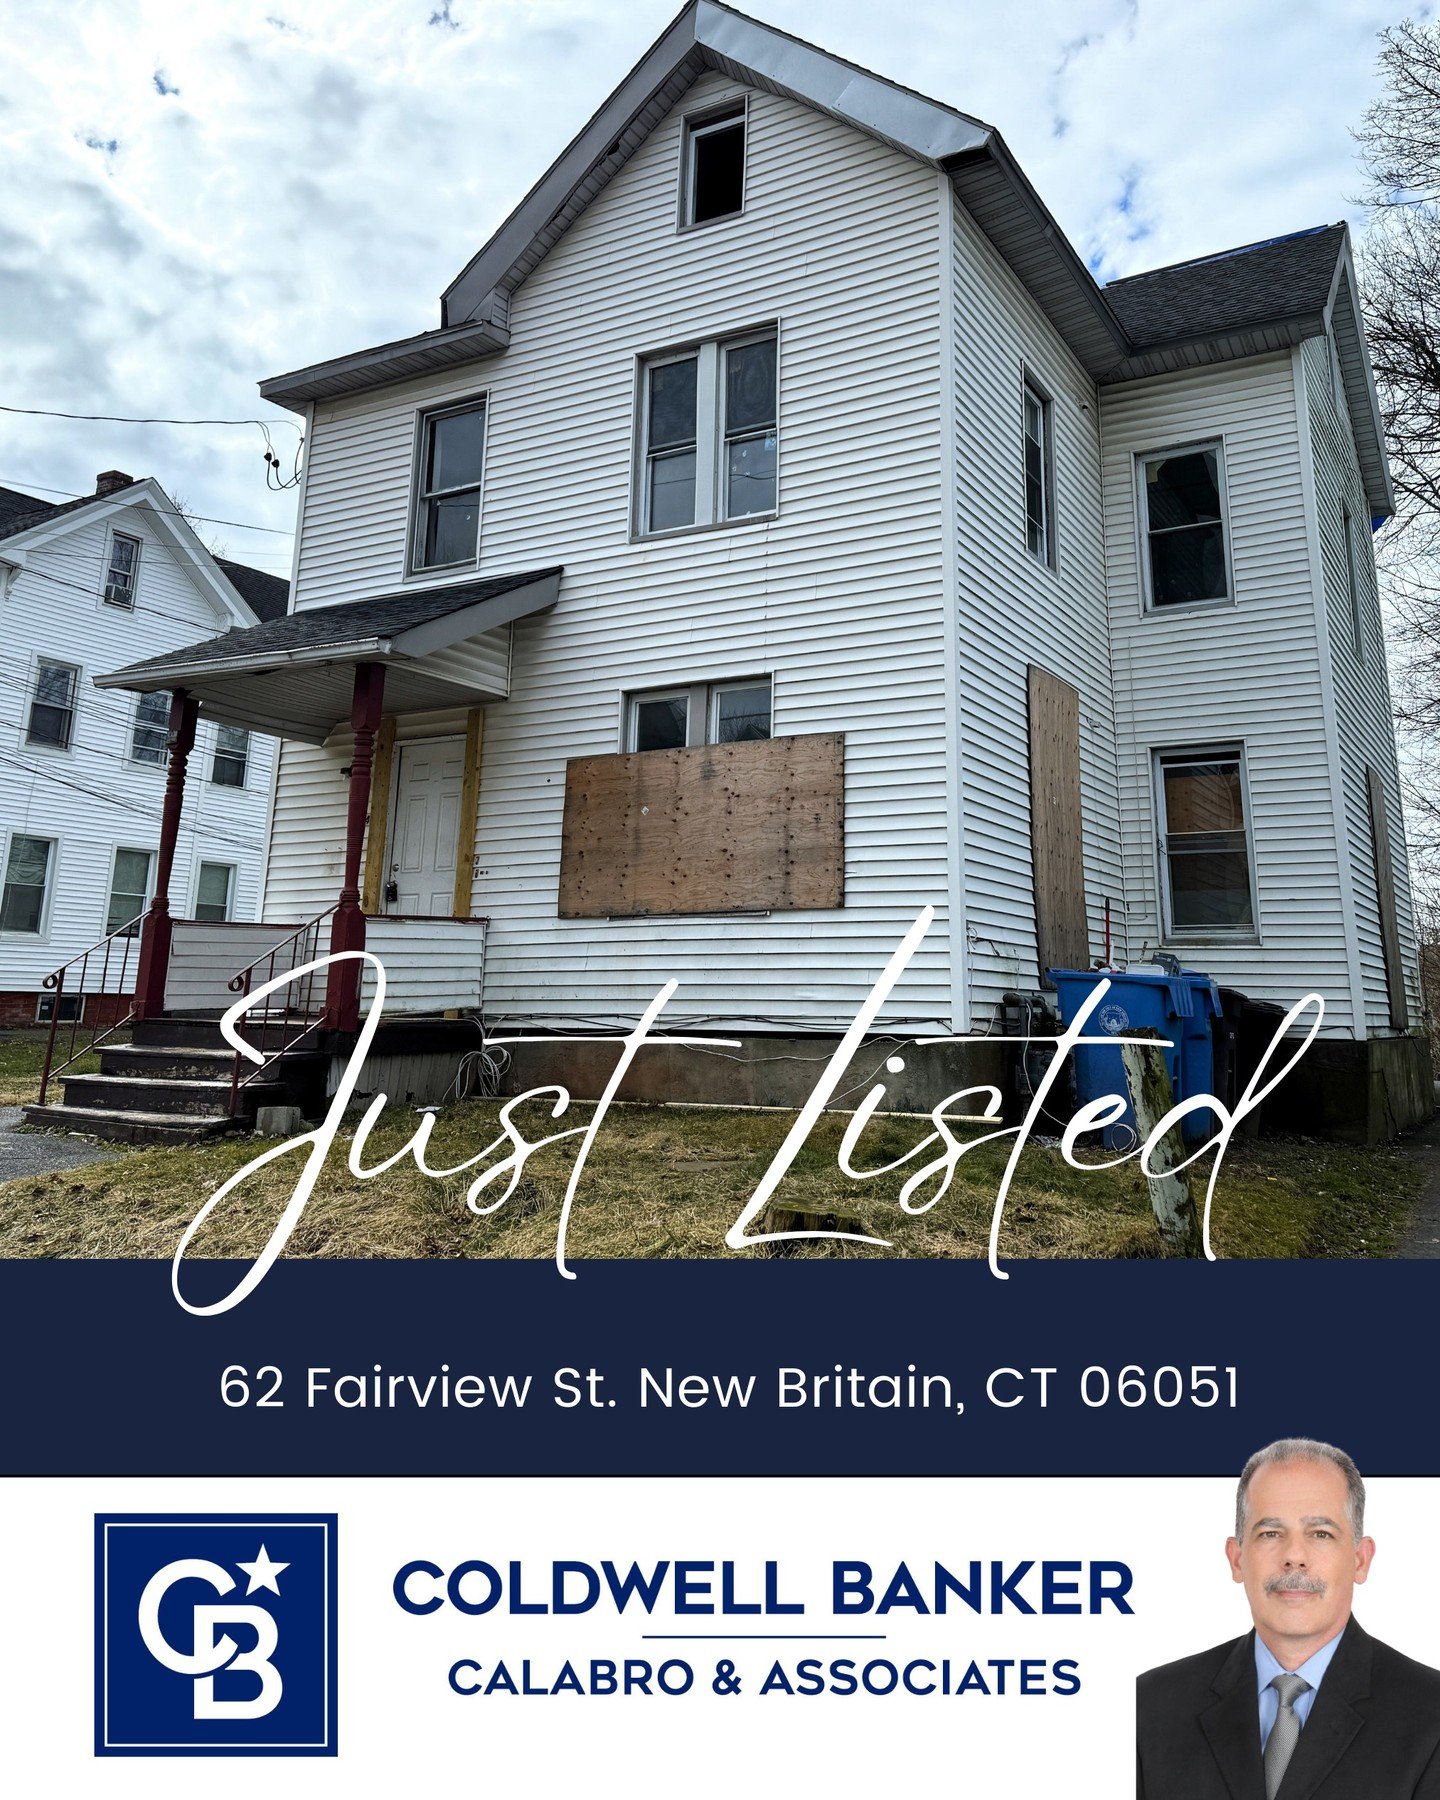 Looking for an investment opportunity? Michael has a new listing at 62 Fairview St. in New Britain that's perfect! 😍

This listing presents two distinct buildings, both two-family houses. Building 1 is 1876 SF 8 rooms, 4 bedrooms, 2 baths. Despite c